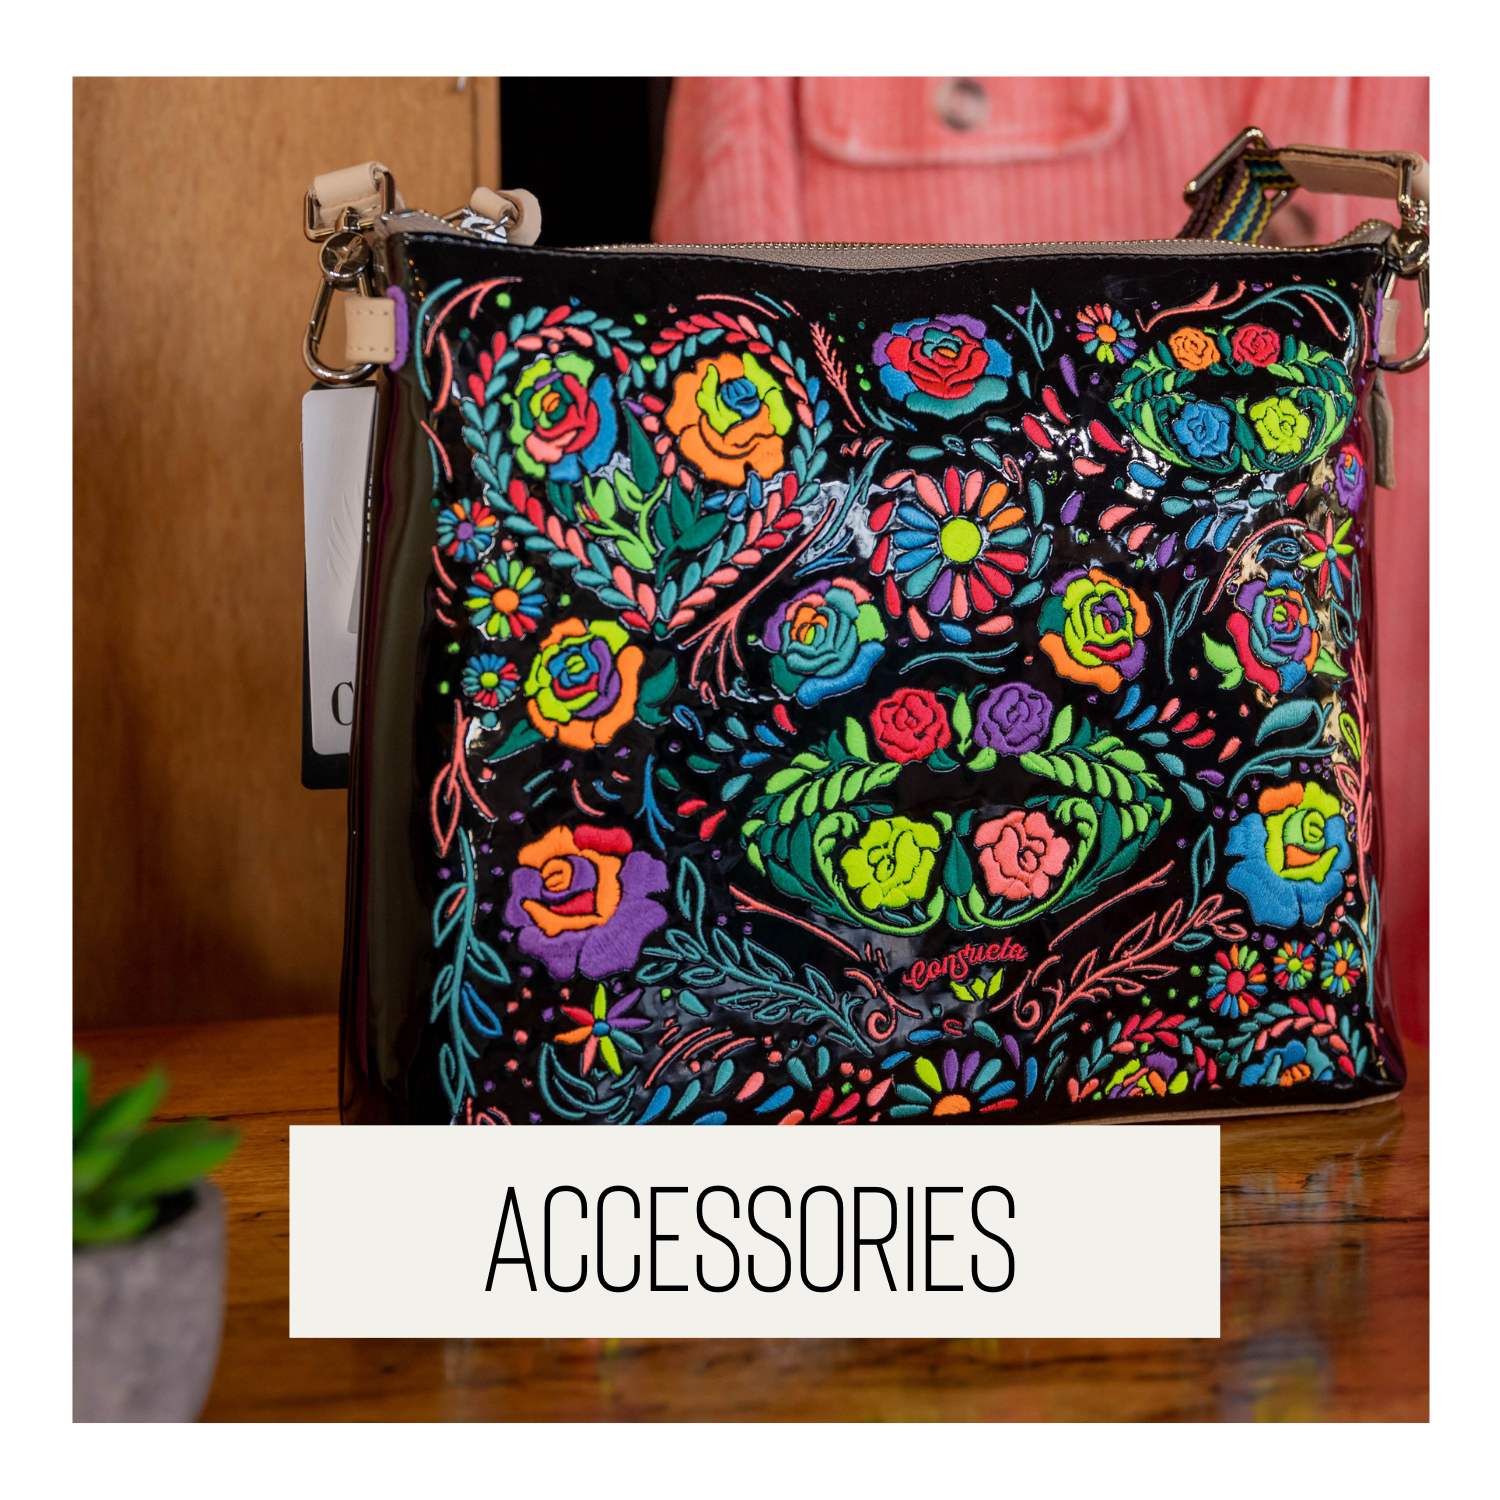 Accessories Collection | Stuffology - Where Vintage Meets Modern | Crosbyton, TX